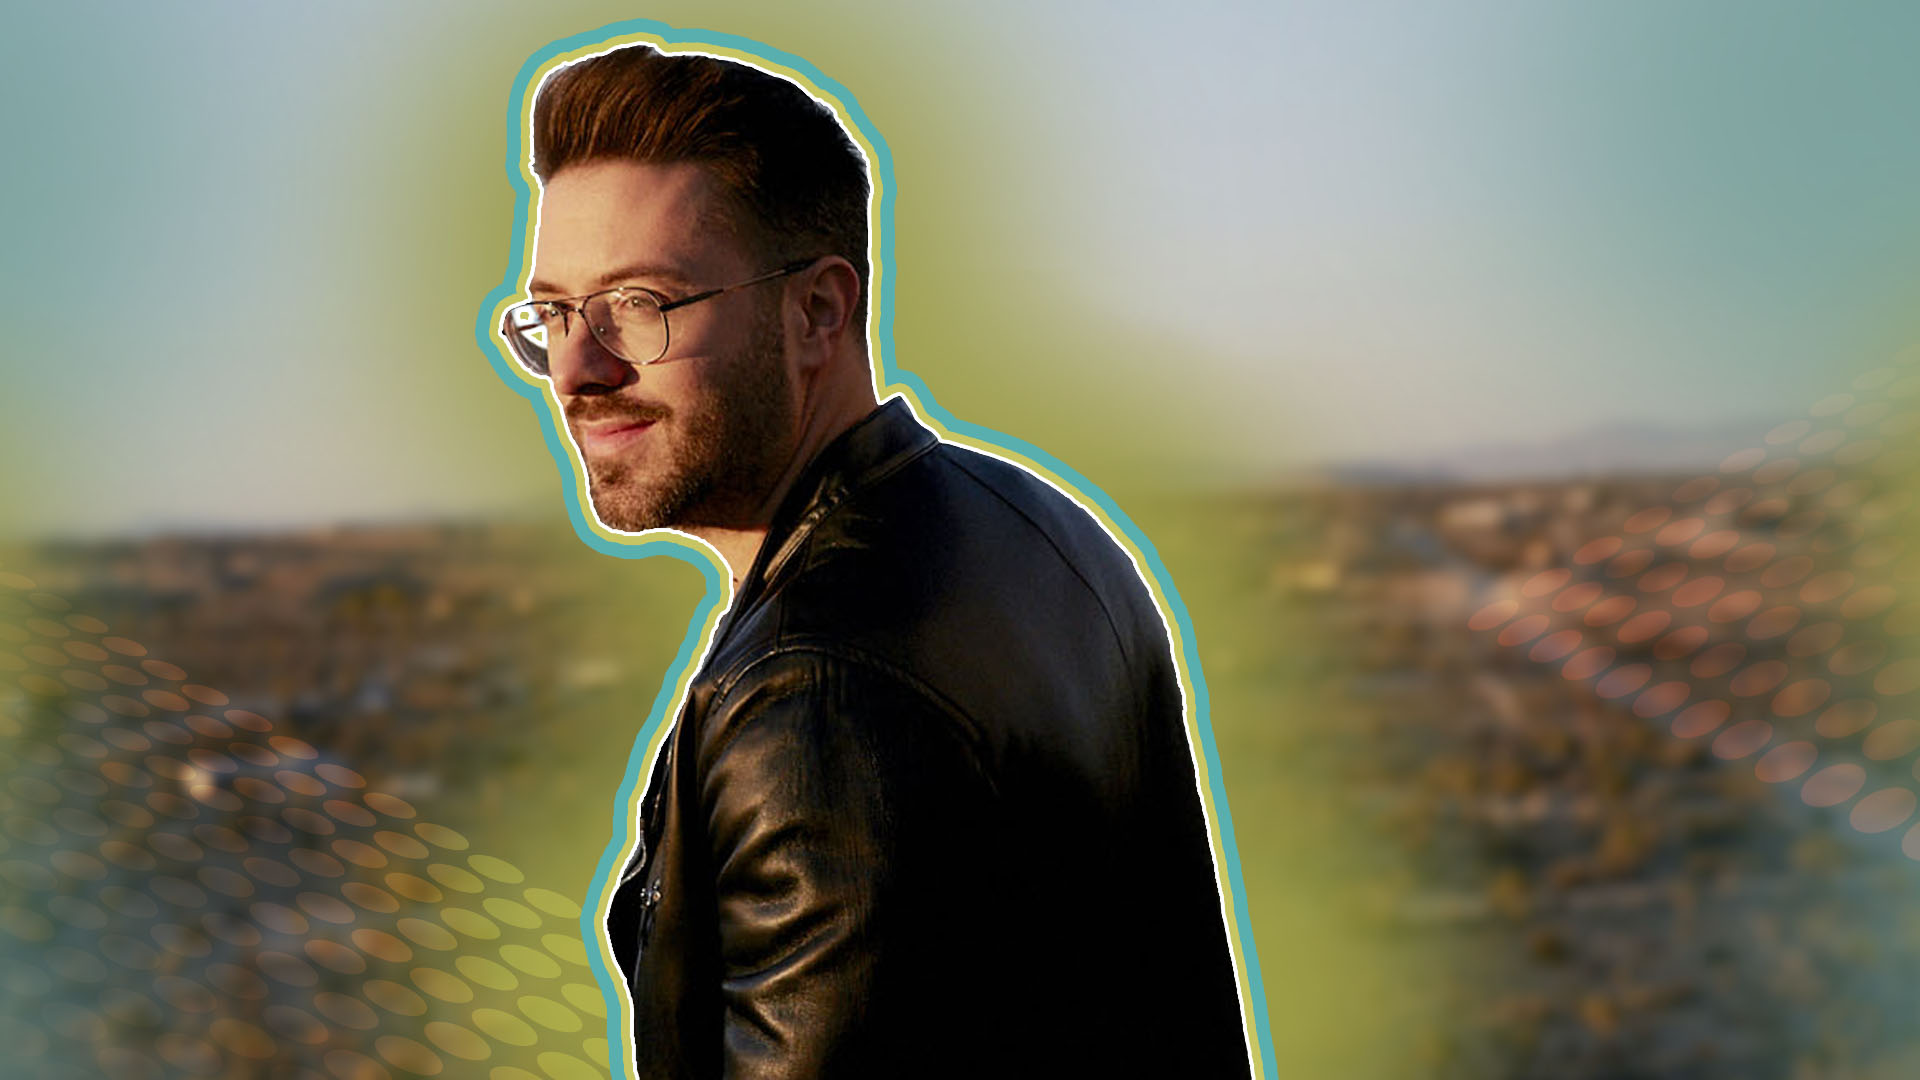 Danny Gokey Shares Why Disappointment is Essential to Our Faith